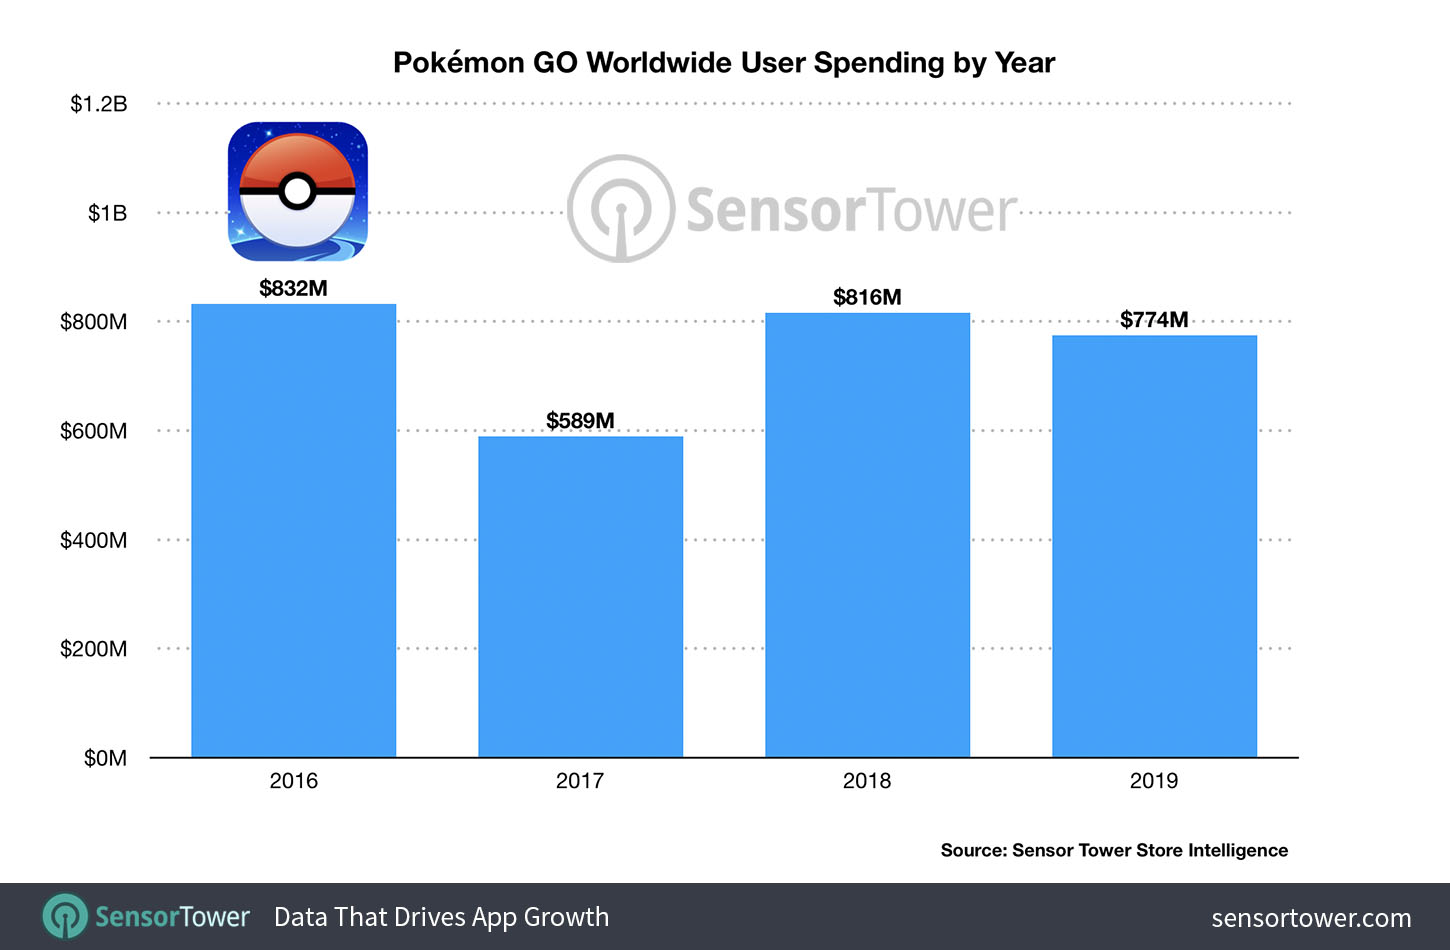 Pokémon GO yearly gross revenue from 2016 to 2019